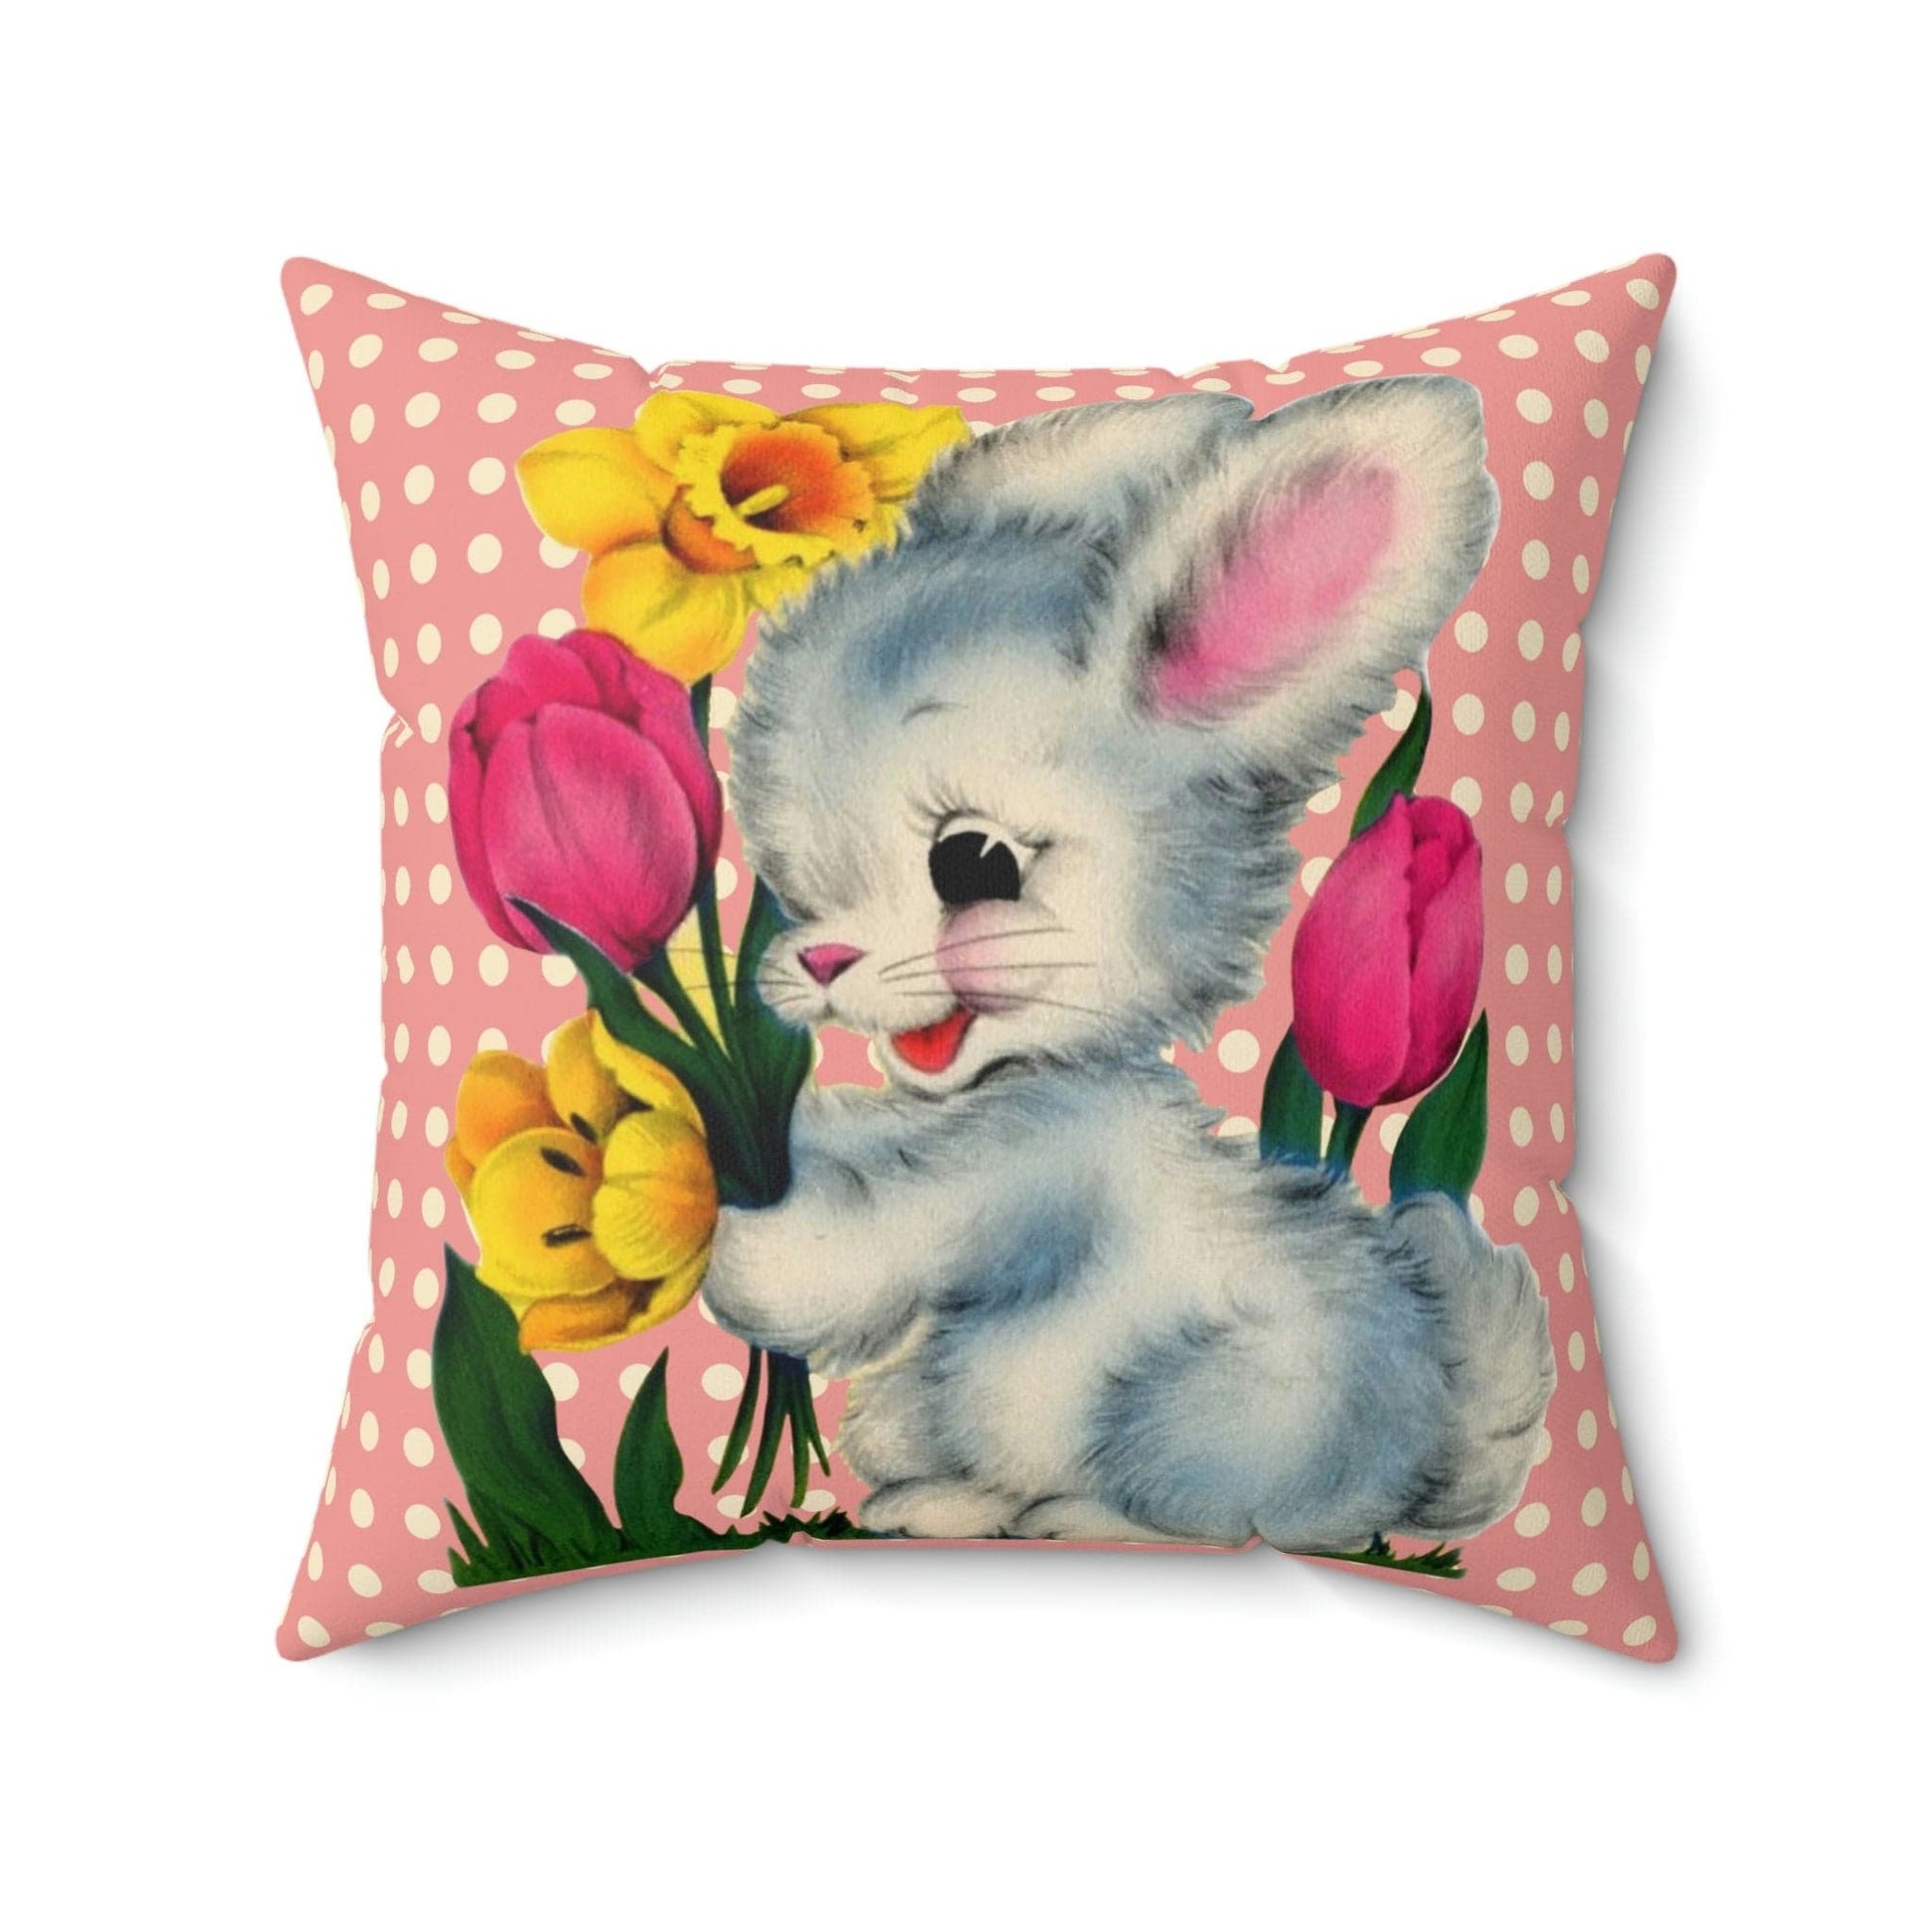 Kate McEnroe New York Vintage Kitschy Easter Bunny Throw Pillow Cover Throw Pillow Covers 18" × 18" 20713802577689554477